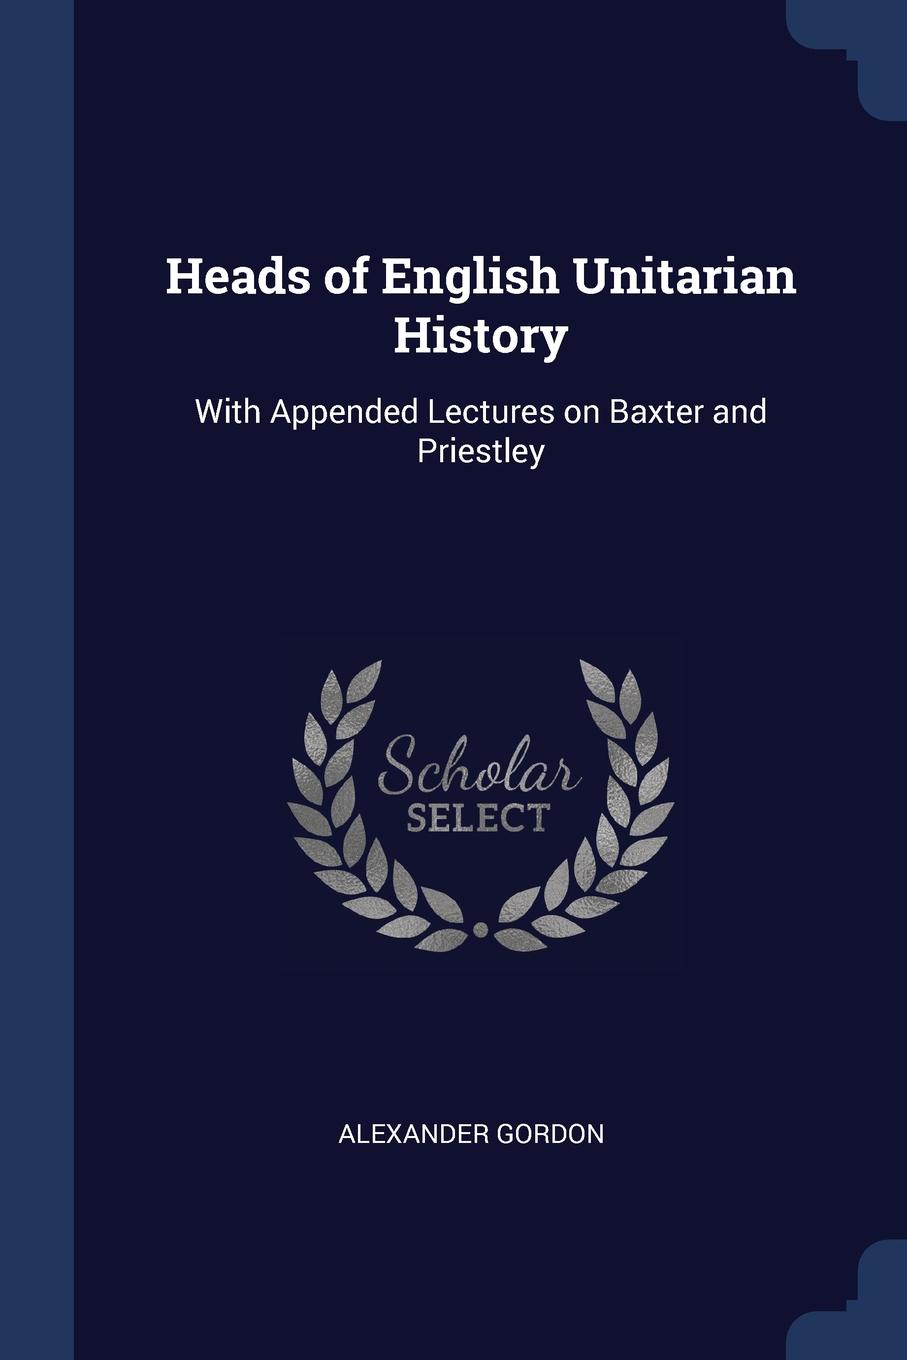 Heads of English Unitarian History. With Appended Lectures on Baxter and Priestley